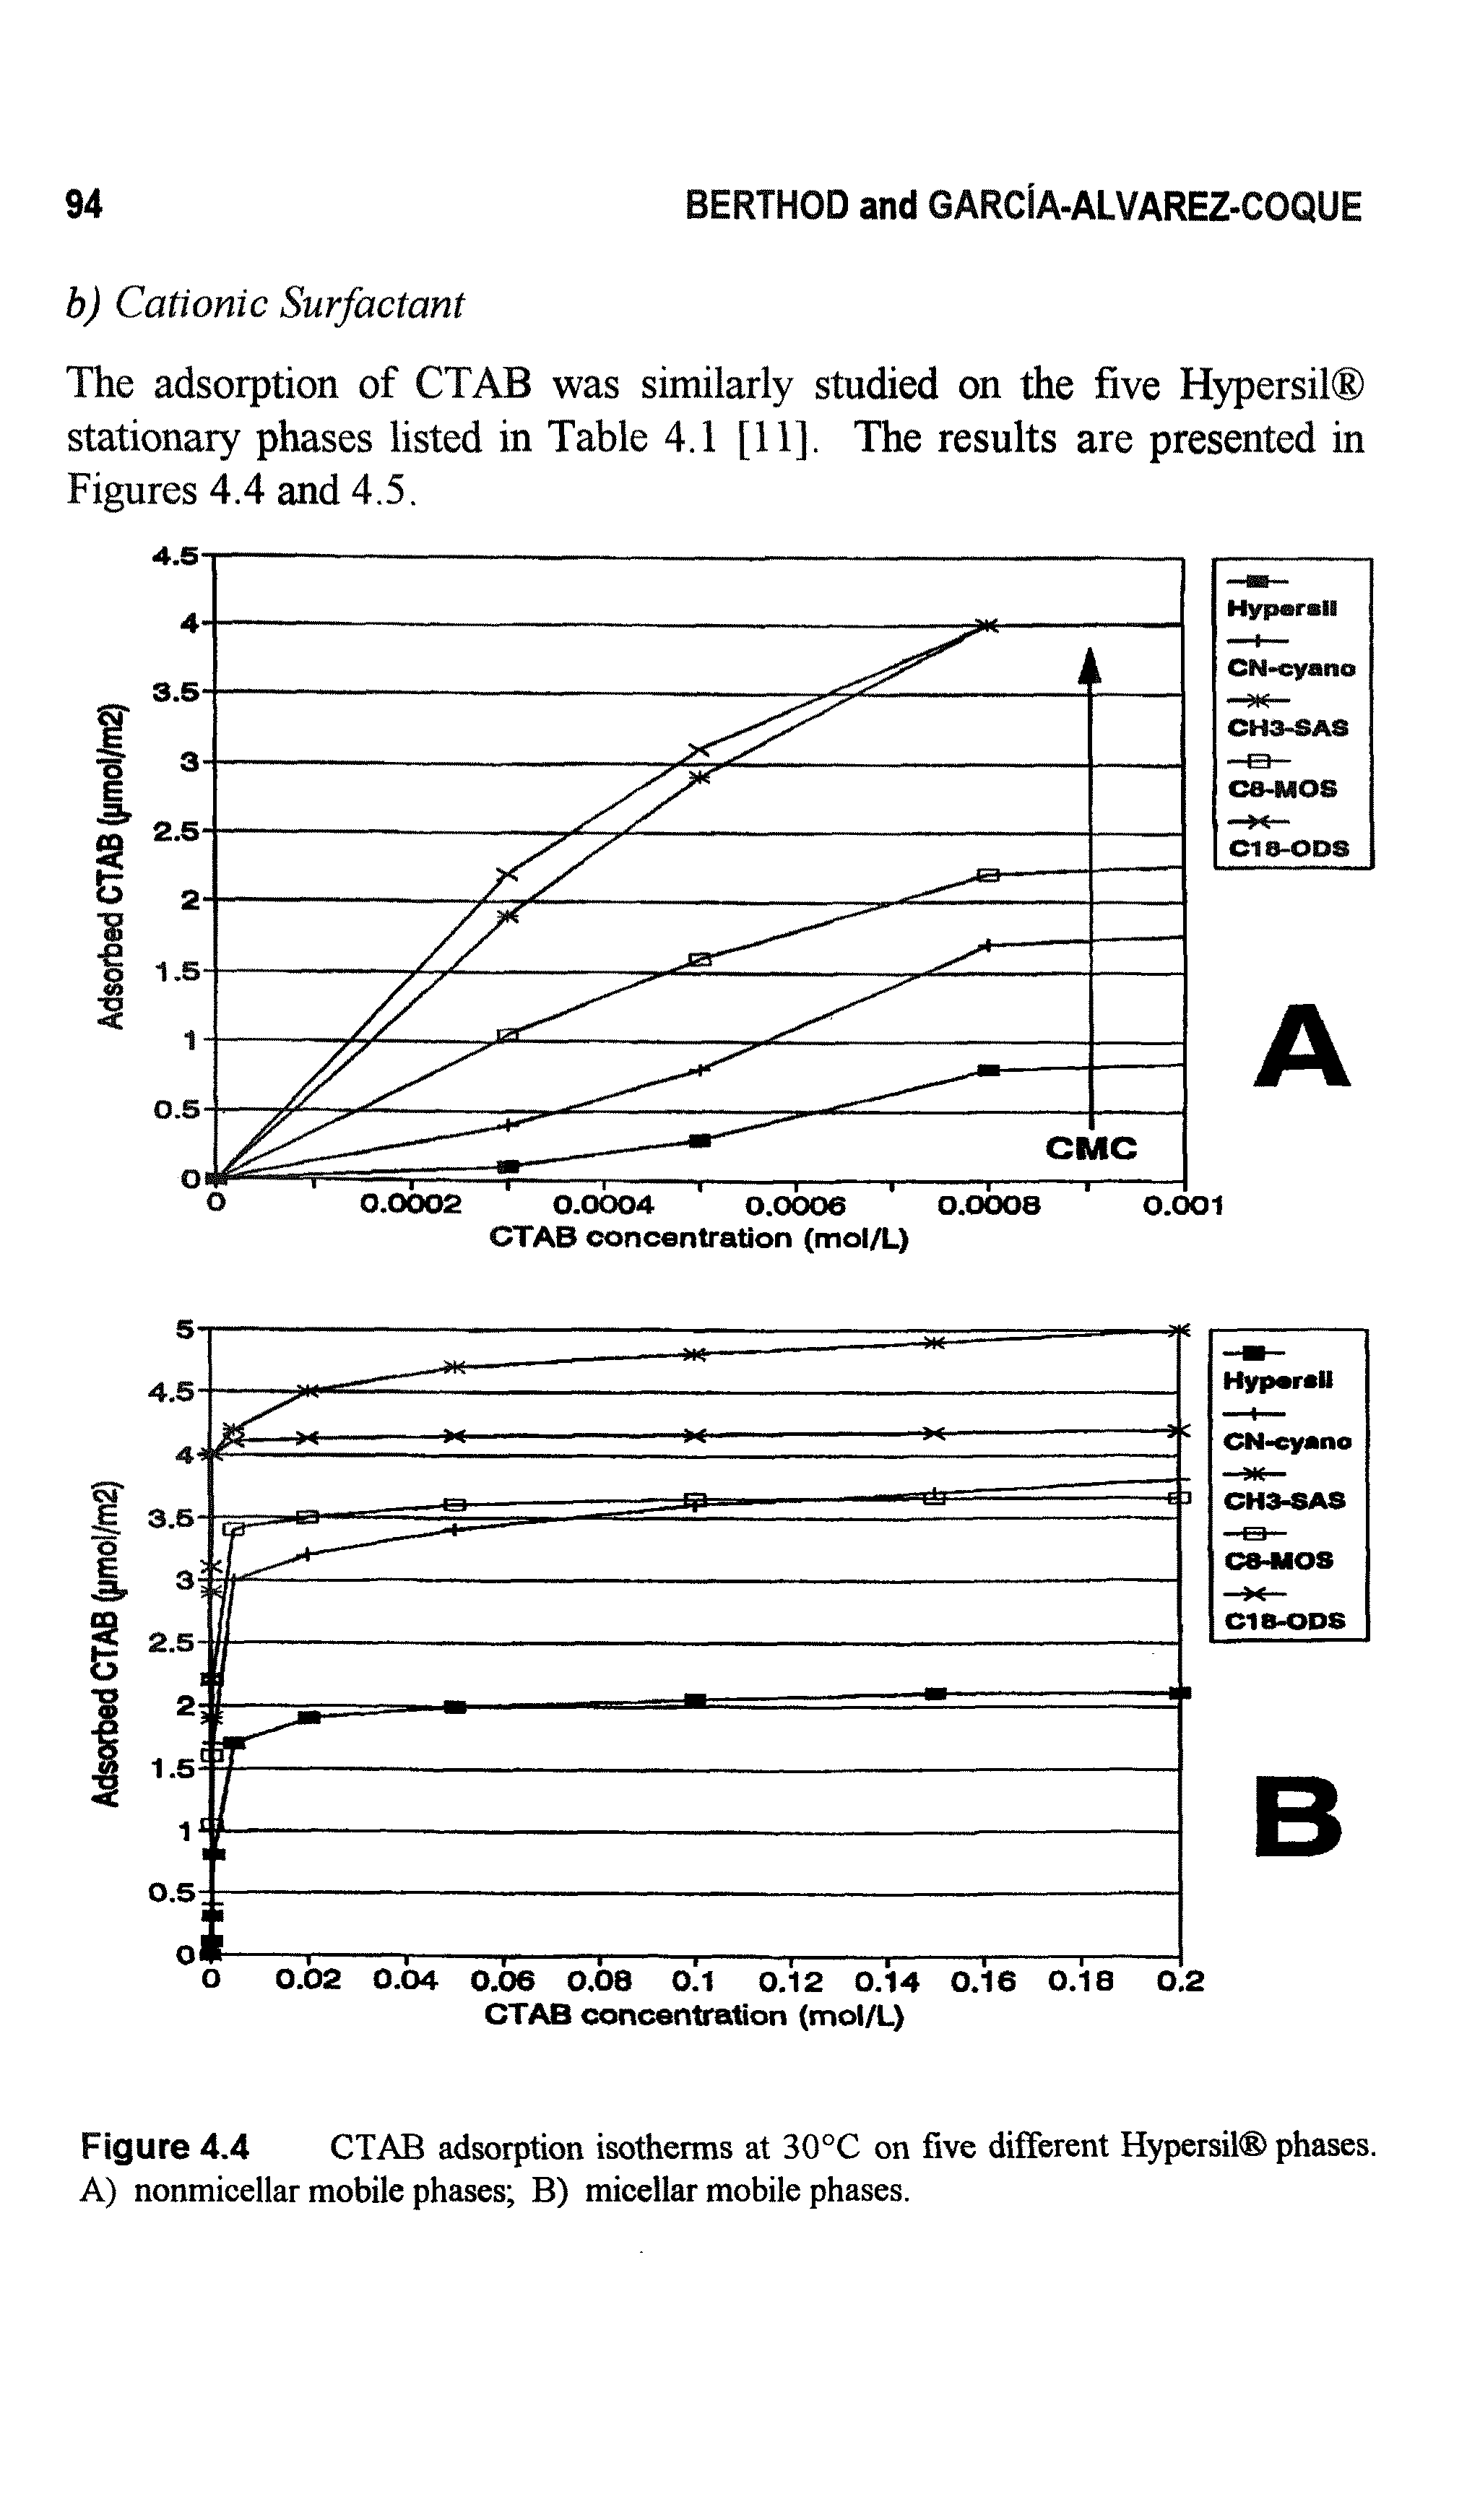 Figure 4.4 CTAB adsorption isotherms at 30°C on five different Hypersil phases. A) nonmicellar mobile phases B) micellar mobile phases.